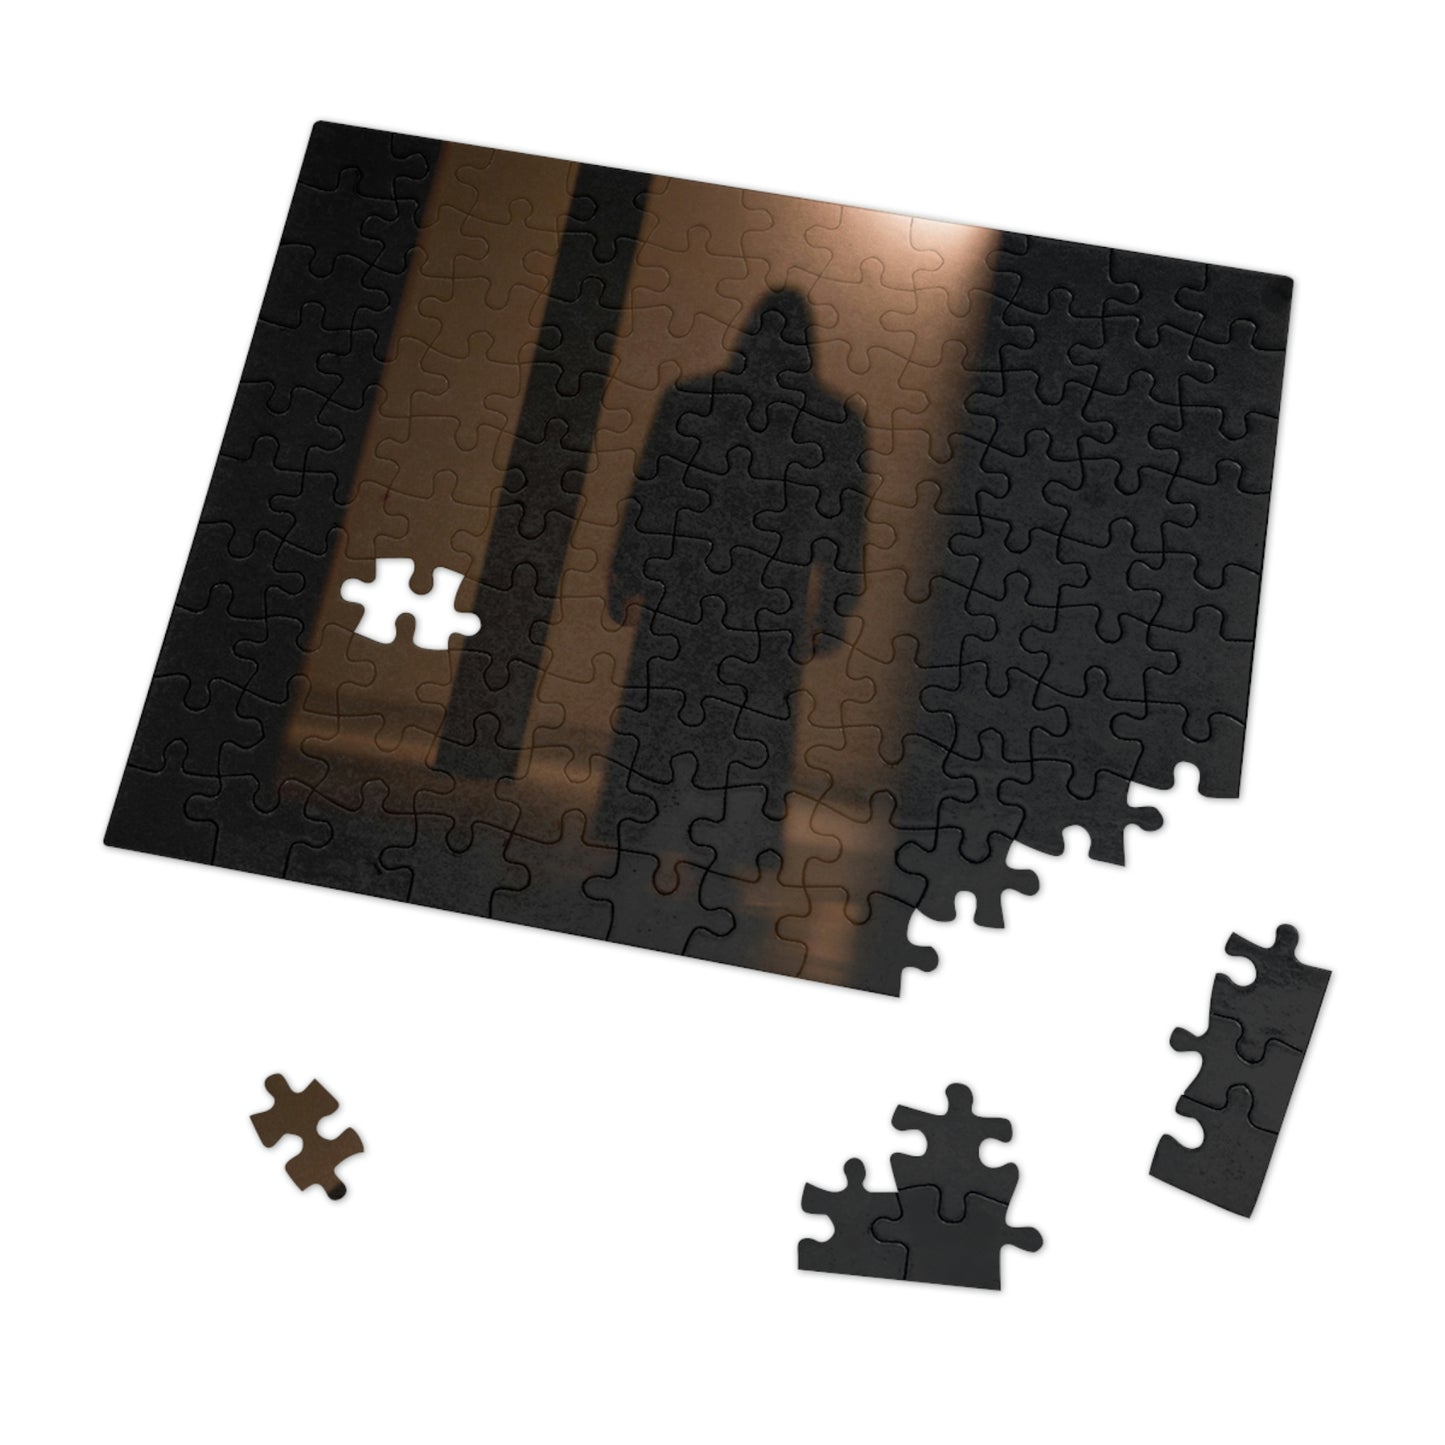 "The Shadow Lurker" - The Alien Jigsaw Puzzle